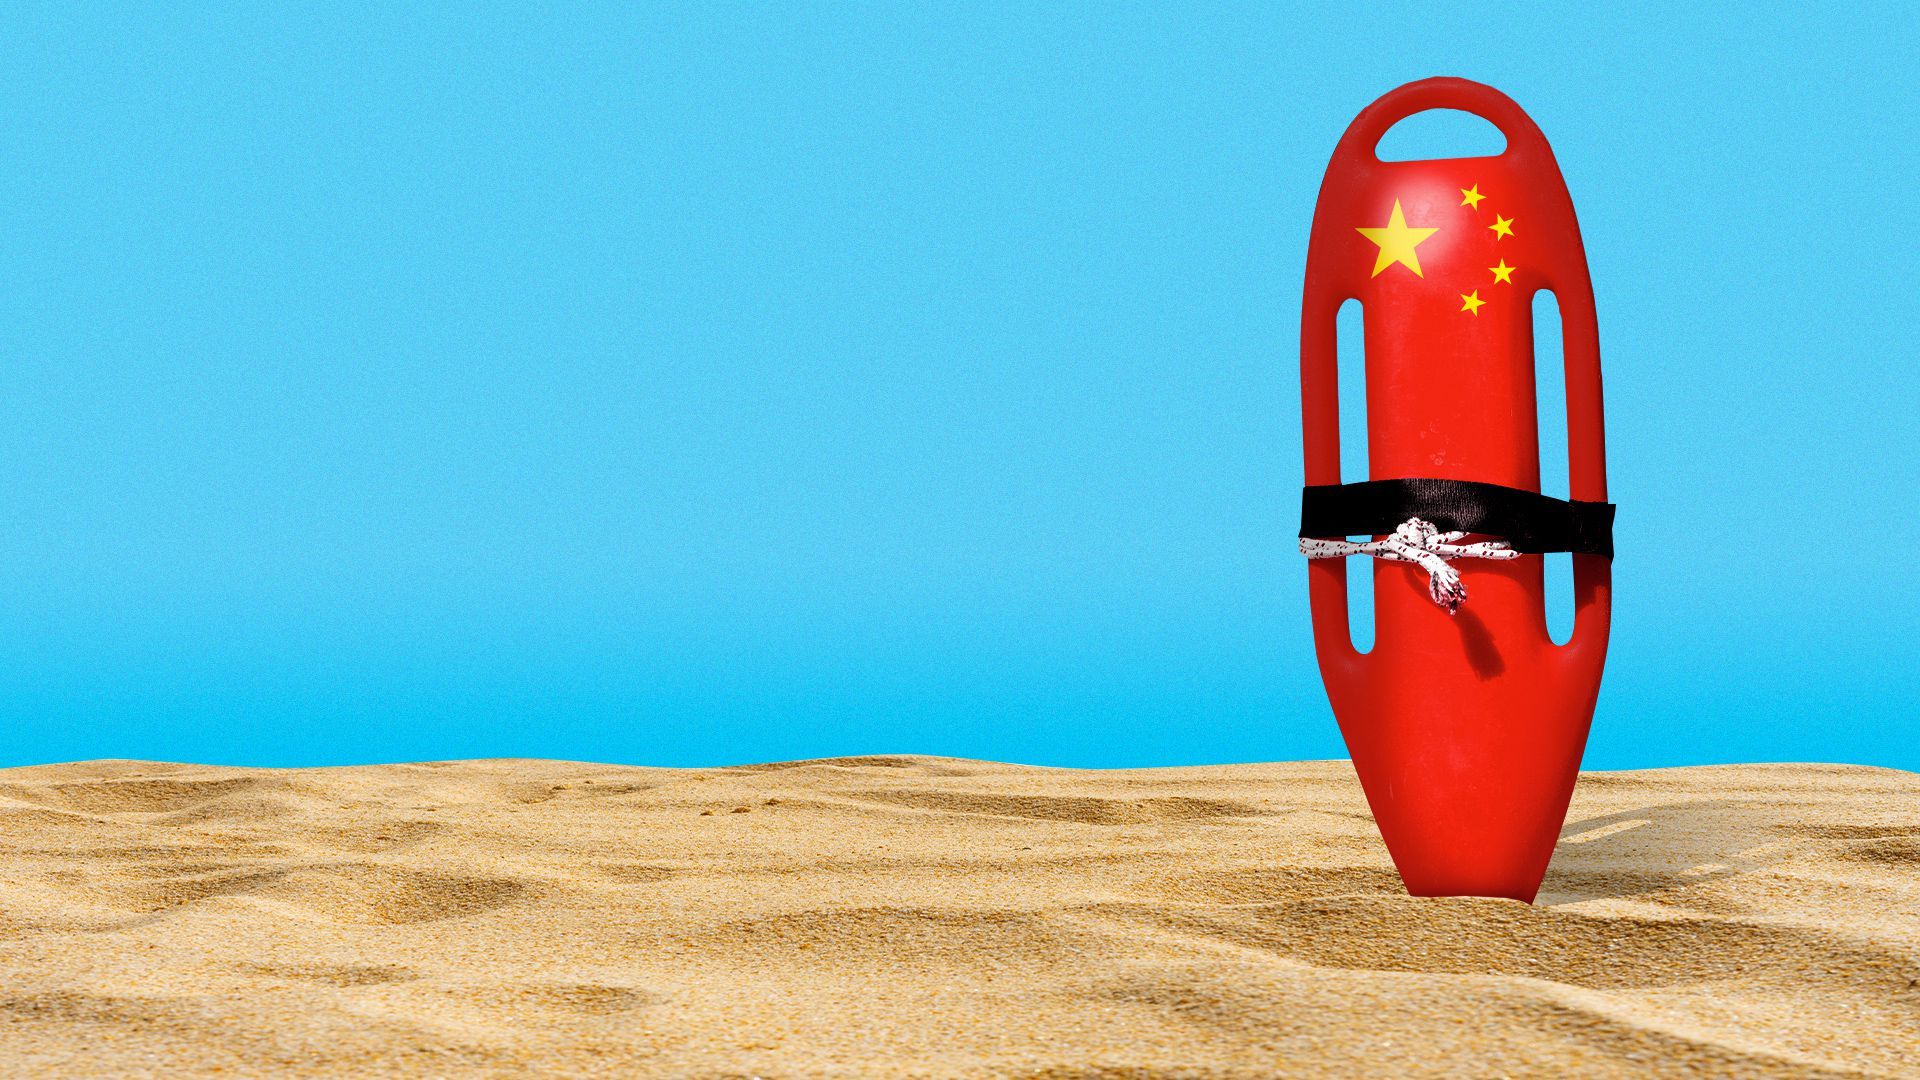 Illustration of a lifeguard's torpedo buoy stuck in the sand with Chinese stars on it. 